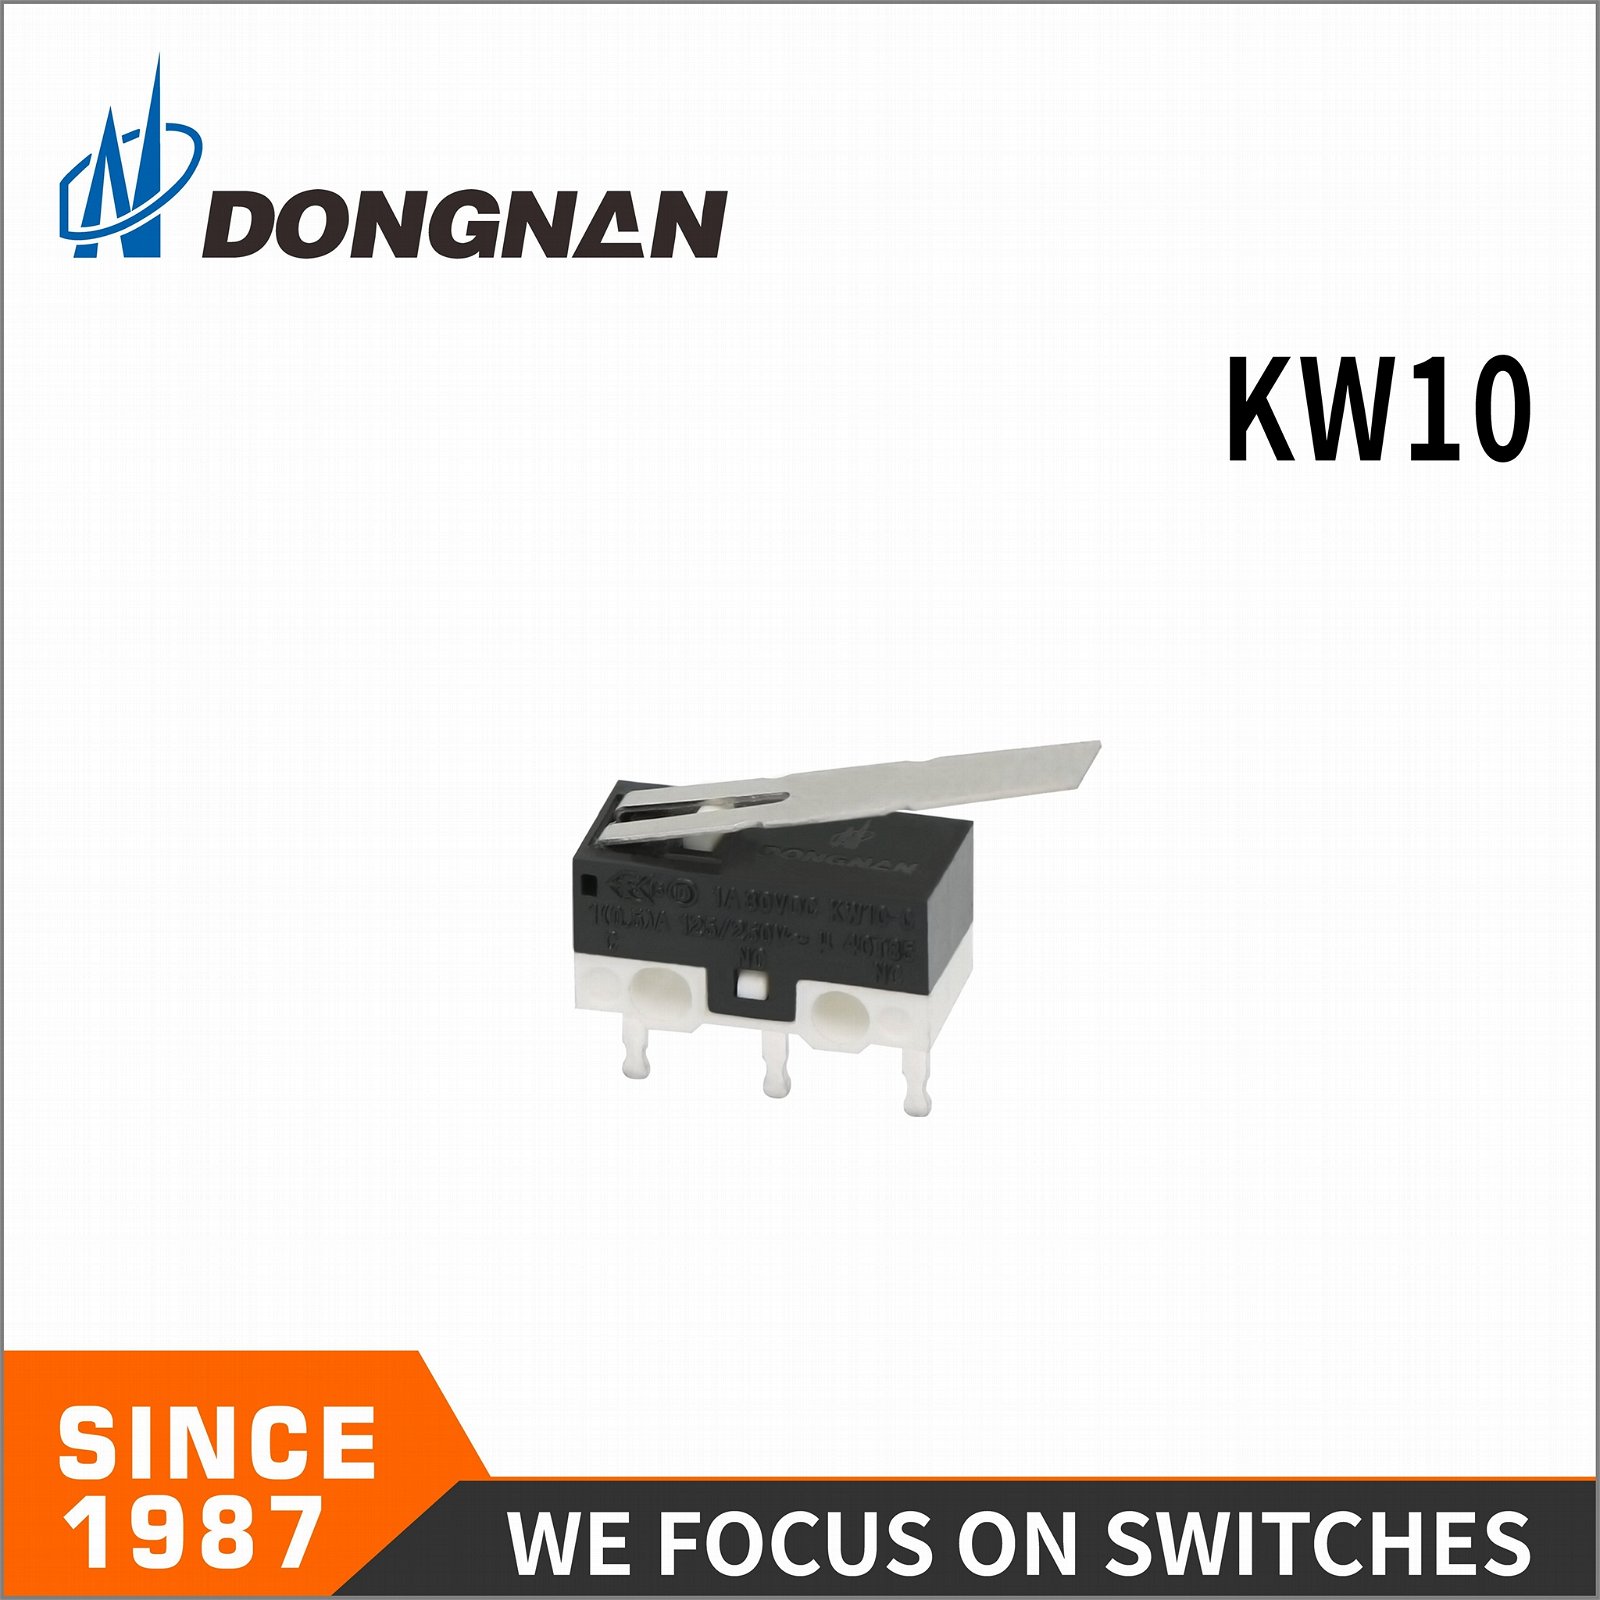 Used in Home Appliance, Audio Video Device, Computer Subminiature  Micro Switch 4